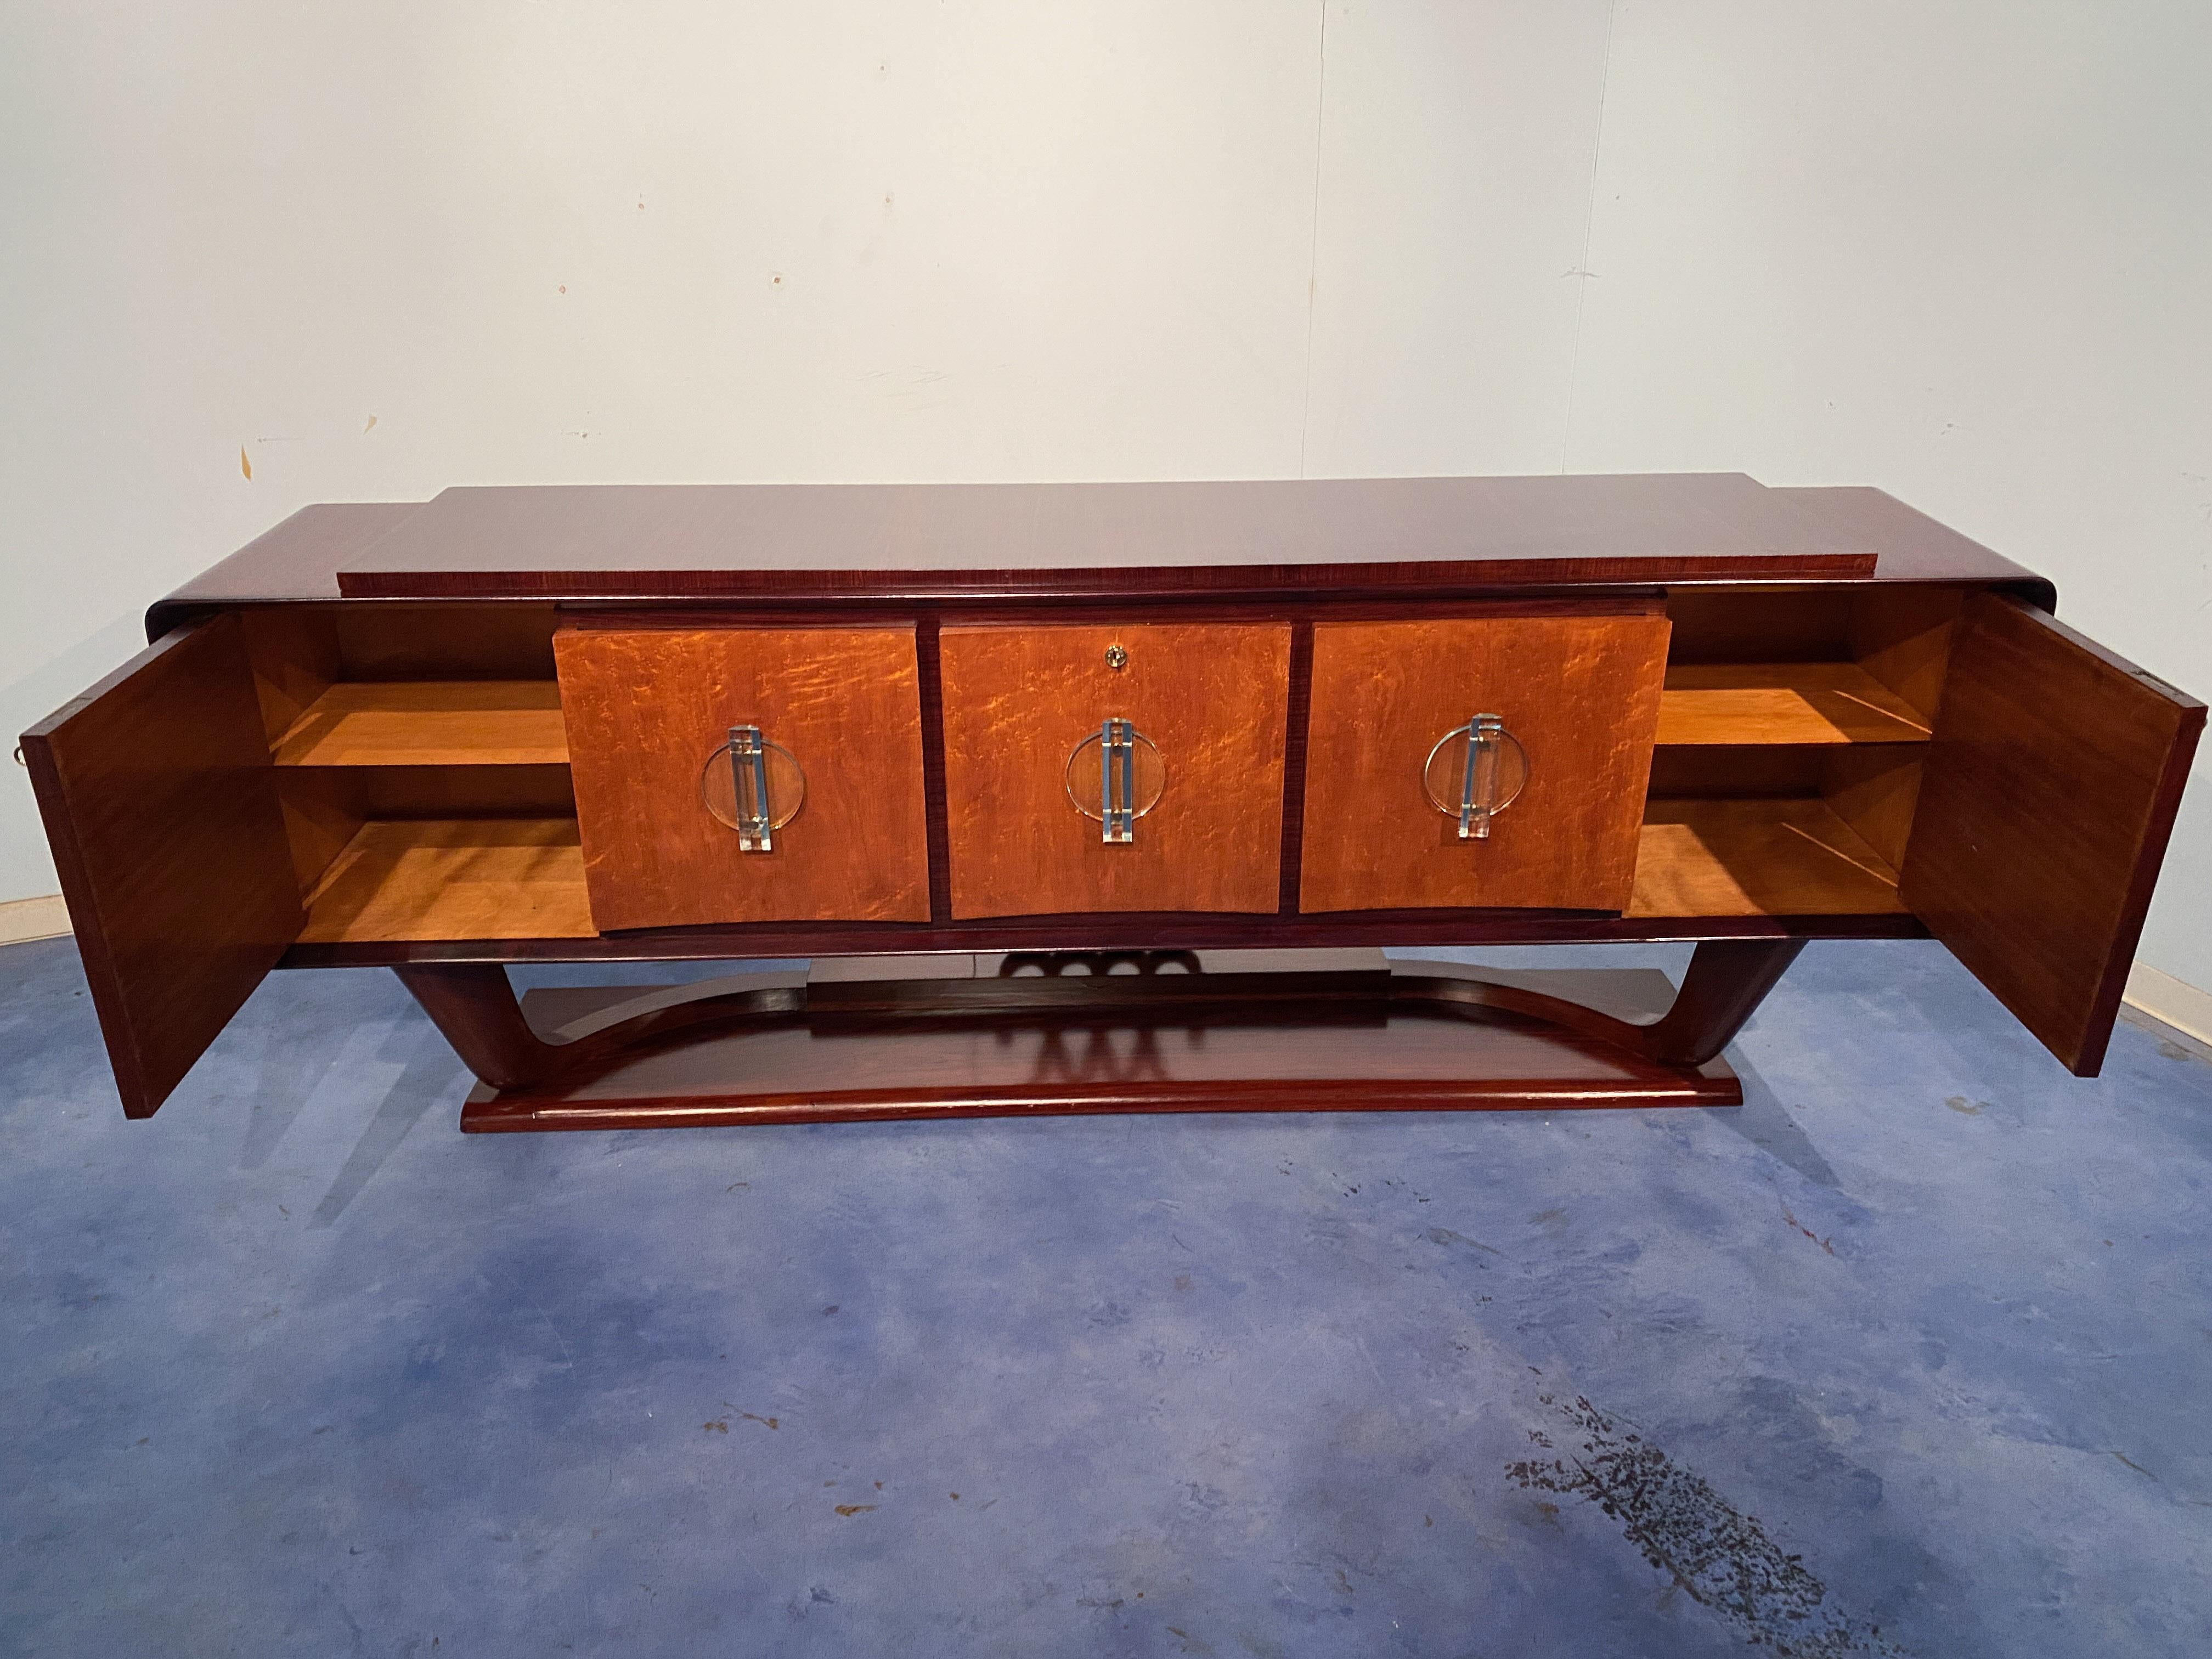 Italian Art Deco Sideboard with Bar Cabinet Attributed to Osvaldo Borsani, 1940s For Sale 9